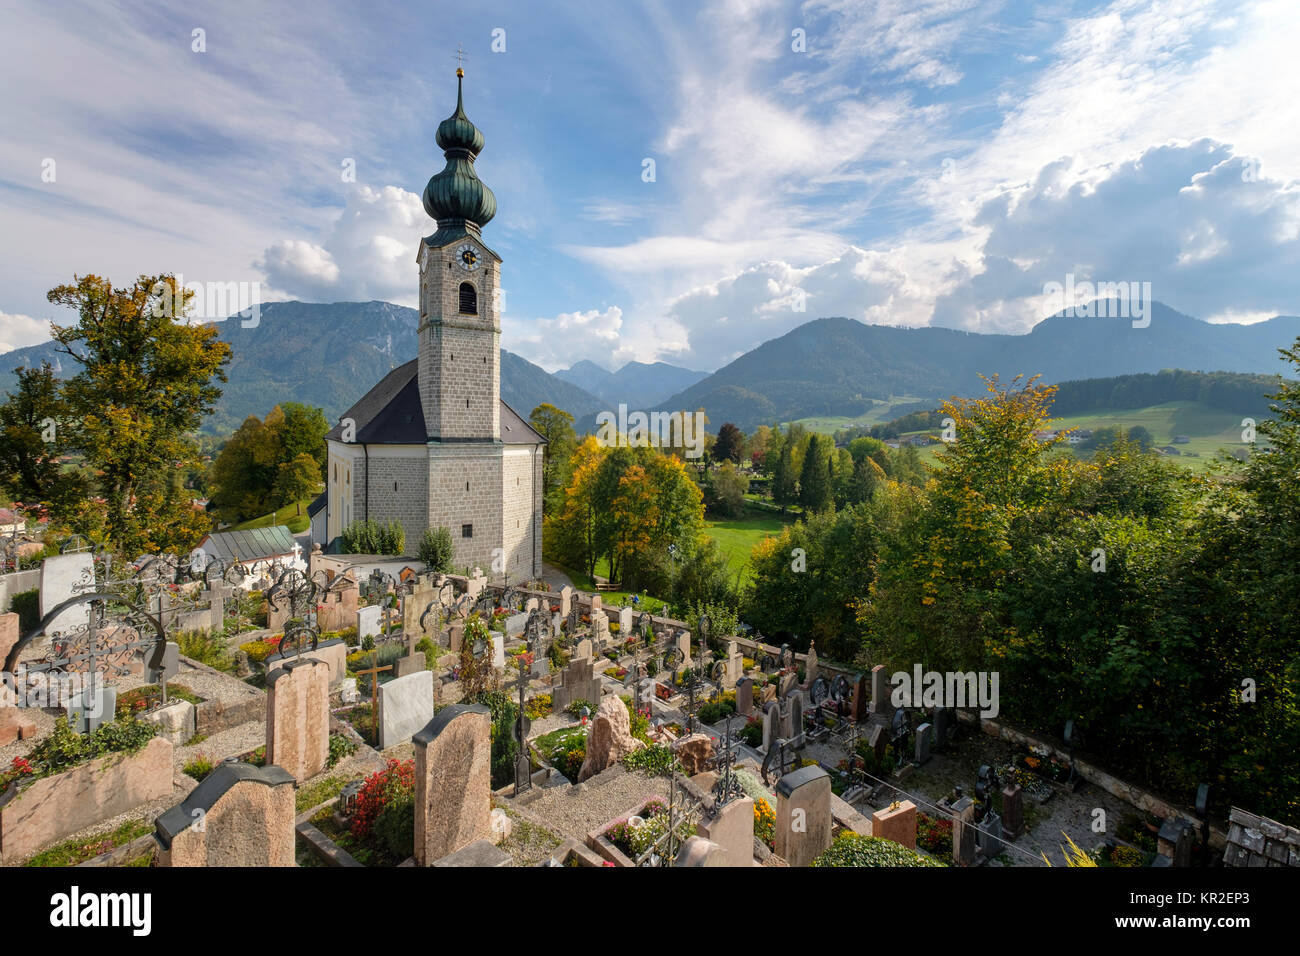 Parish church St. Georg with cemetery, in front of mountain landscape, Ruhpolding, Chiemgau, Upper Bavaria, Bavaria, Germany Stock Photo